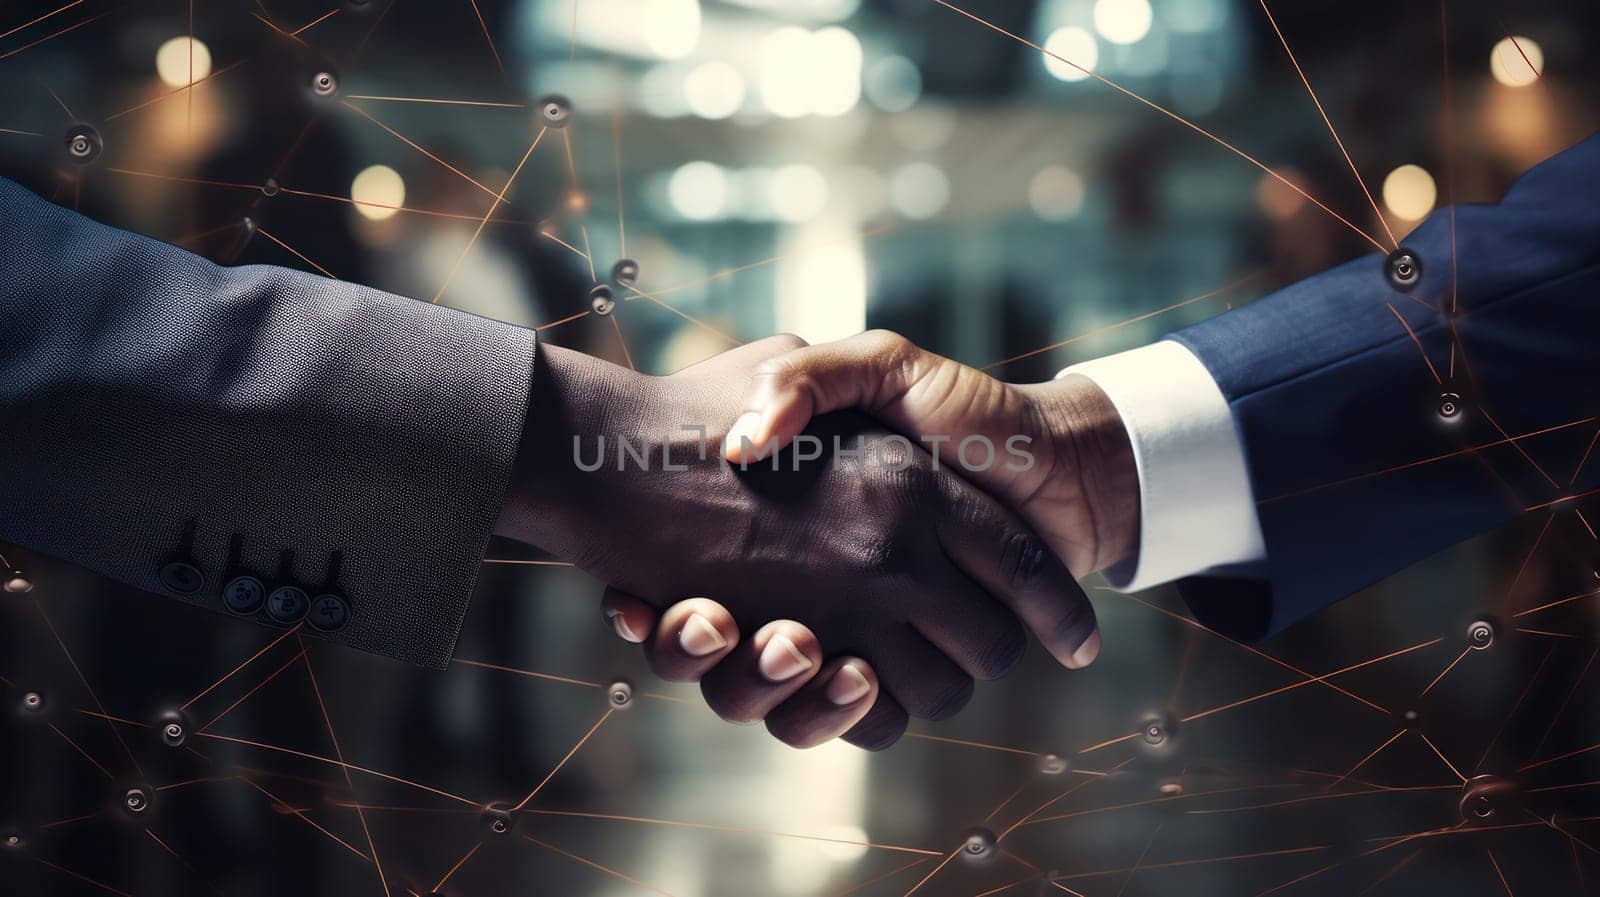 Successful Business Handshake: Trusting Businessmen Sealing a Prosperous Partnership in Modern Office by Vichizh